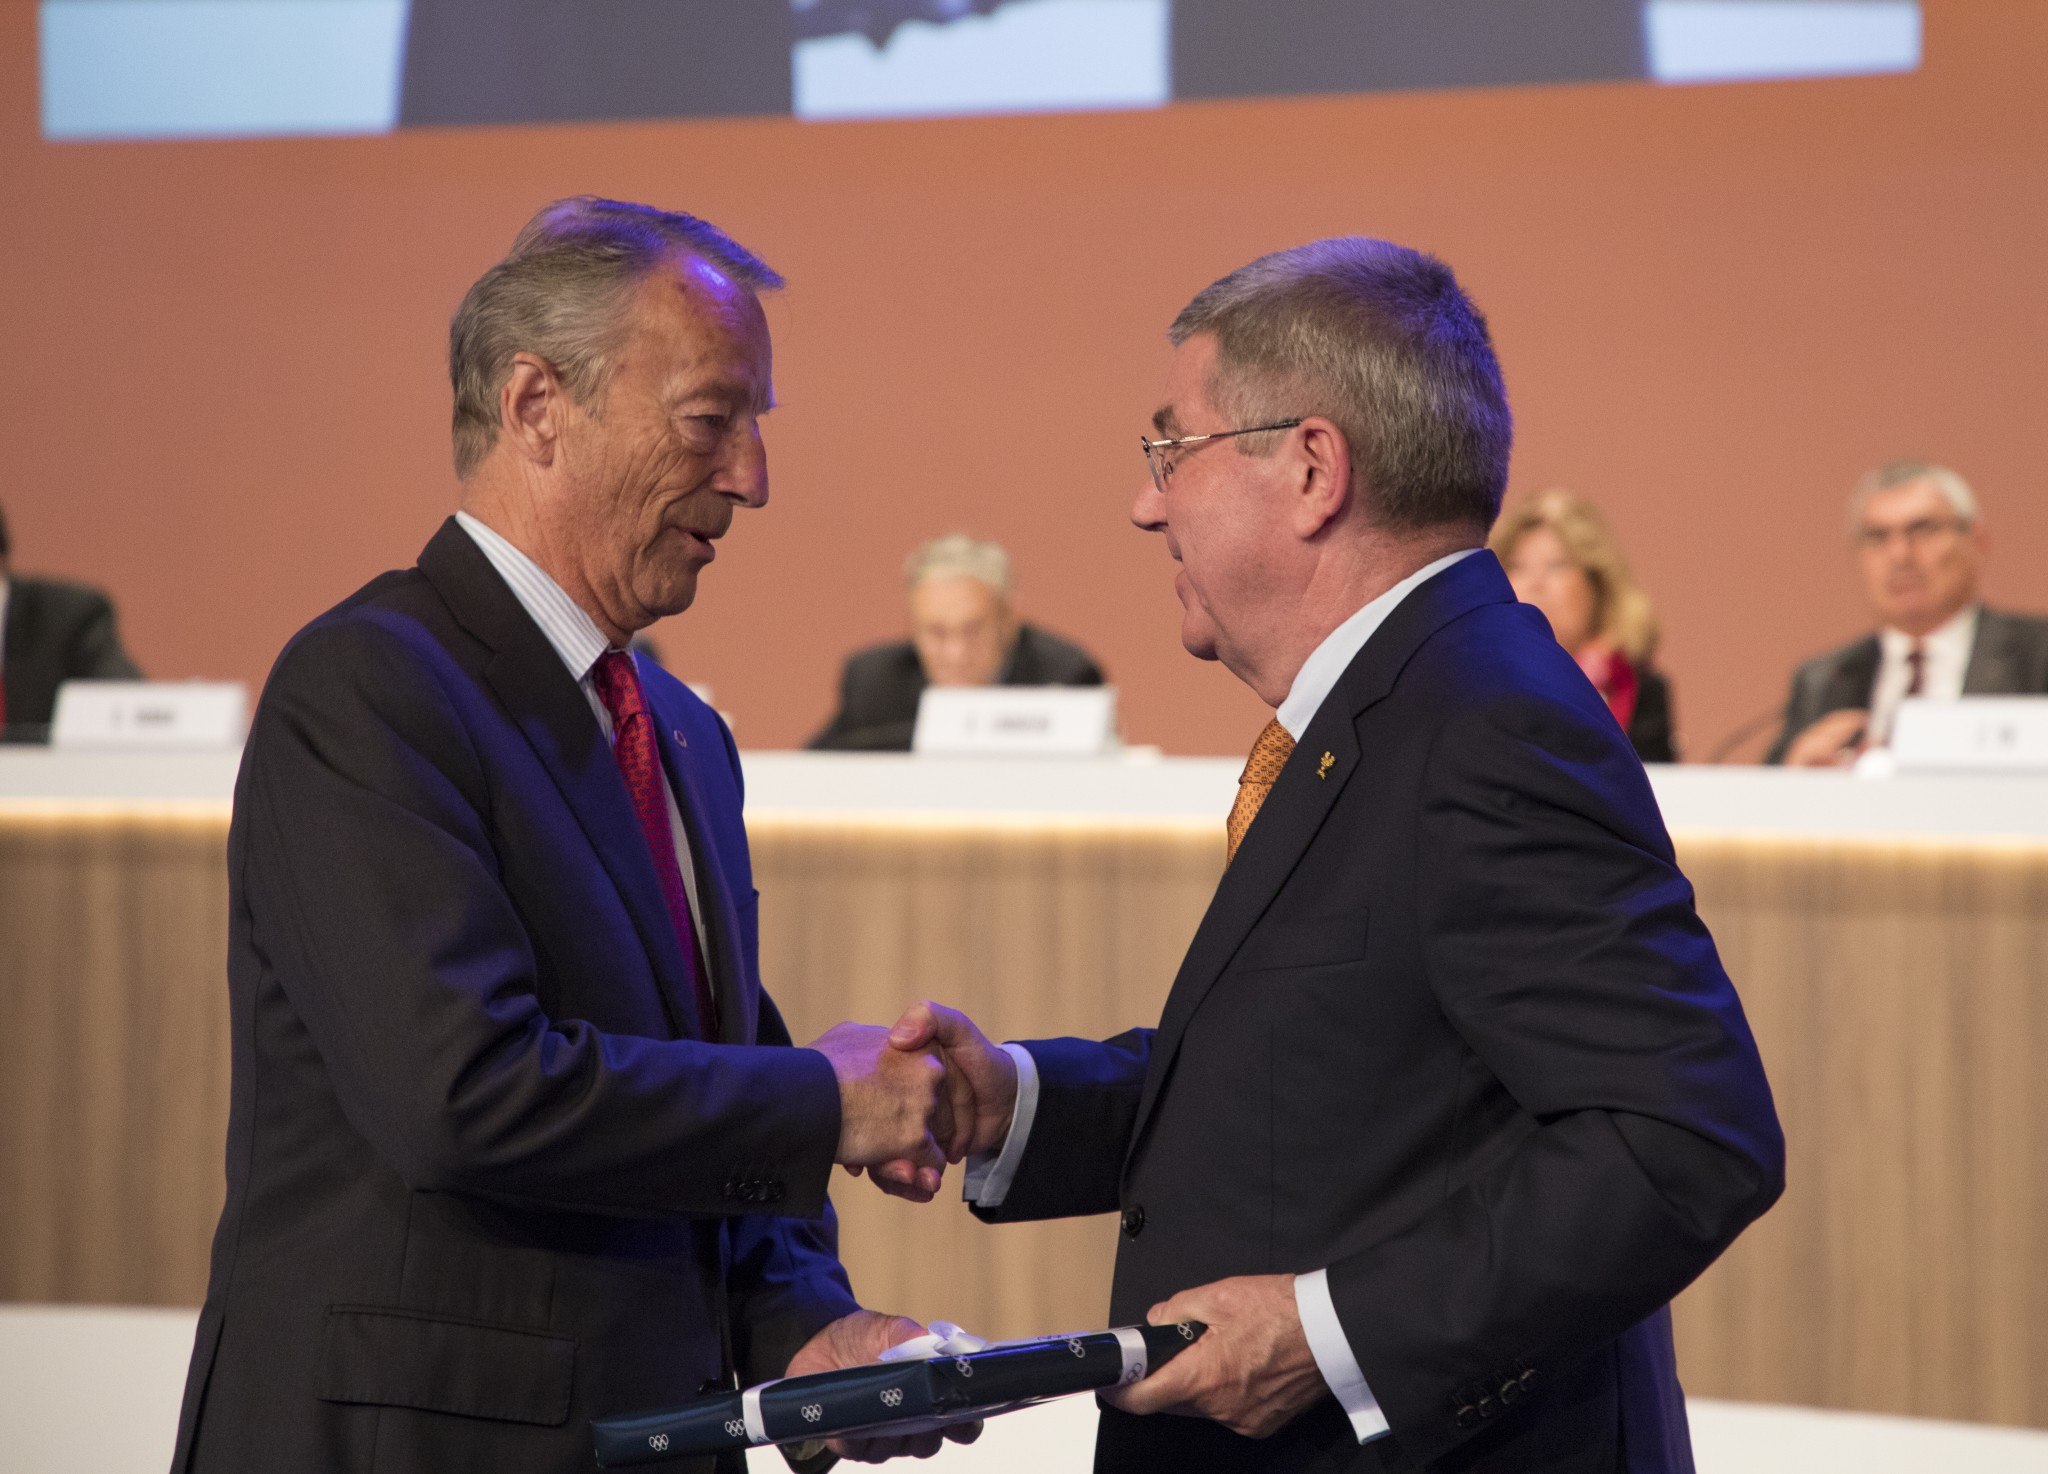 Norway's Gerhard Heiberg was made an honorary member of the IOC after stepping down following 23 years ©IOC